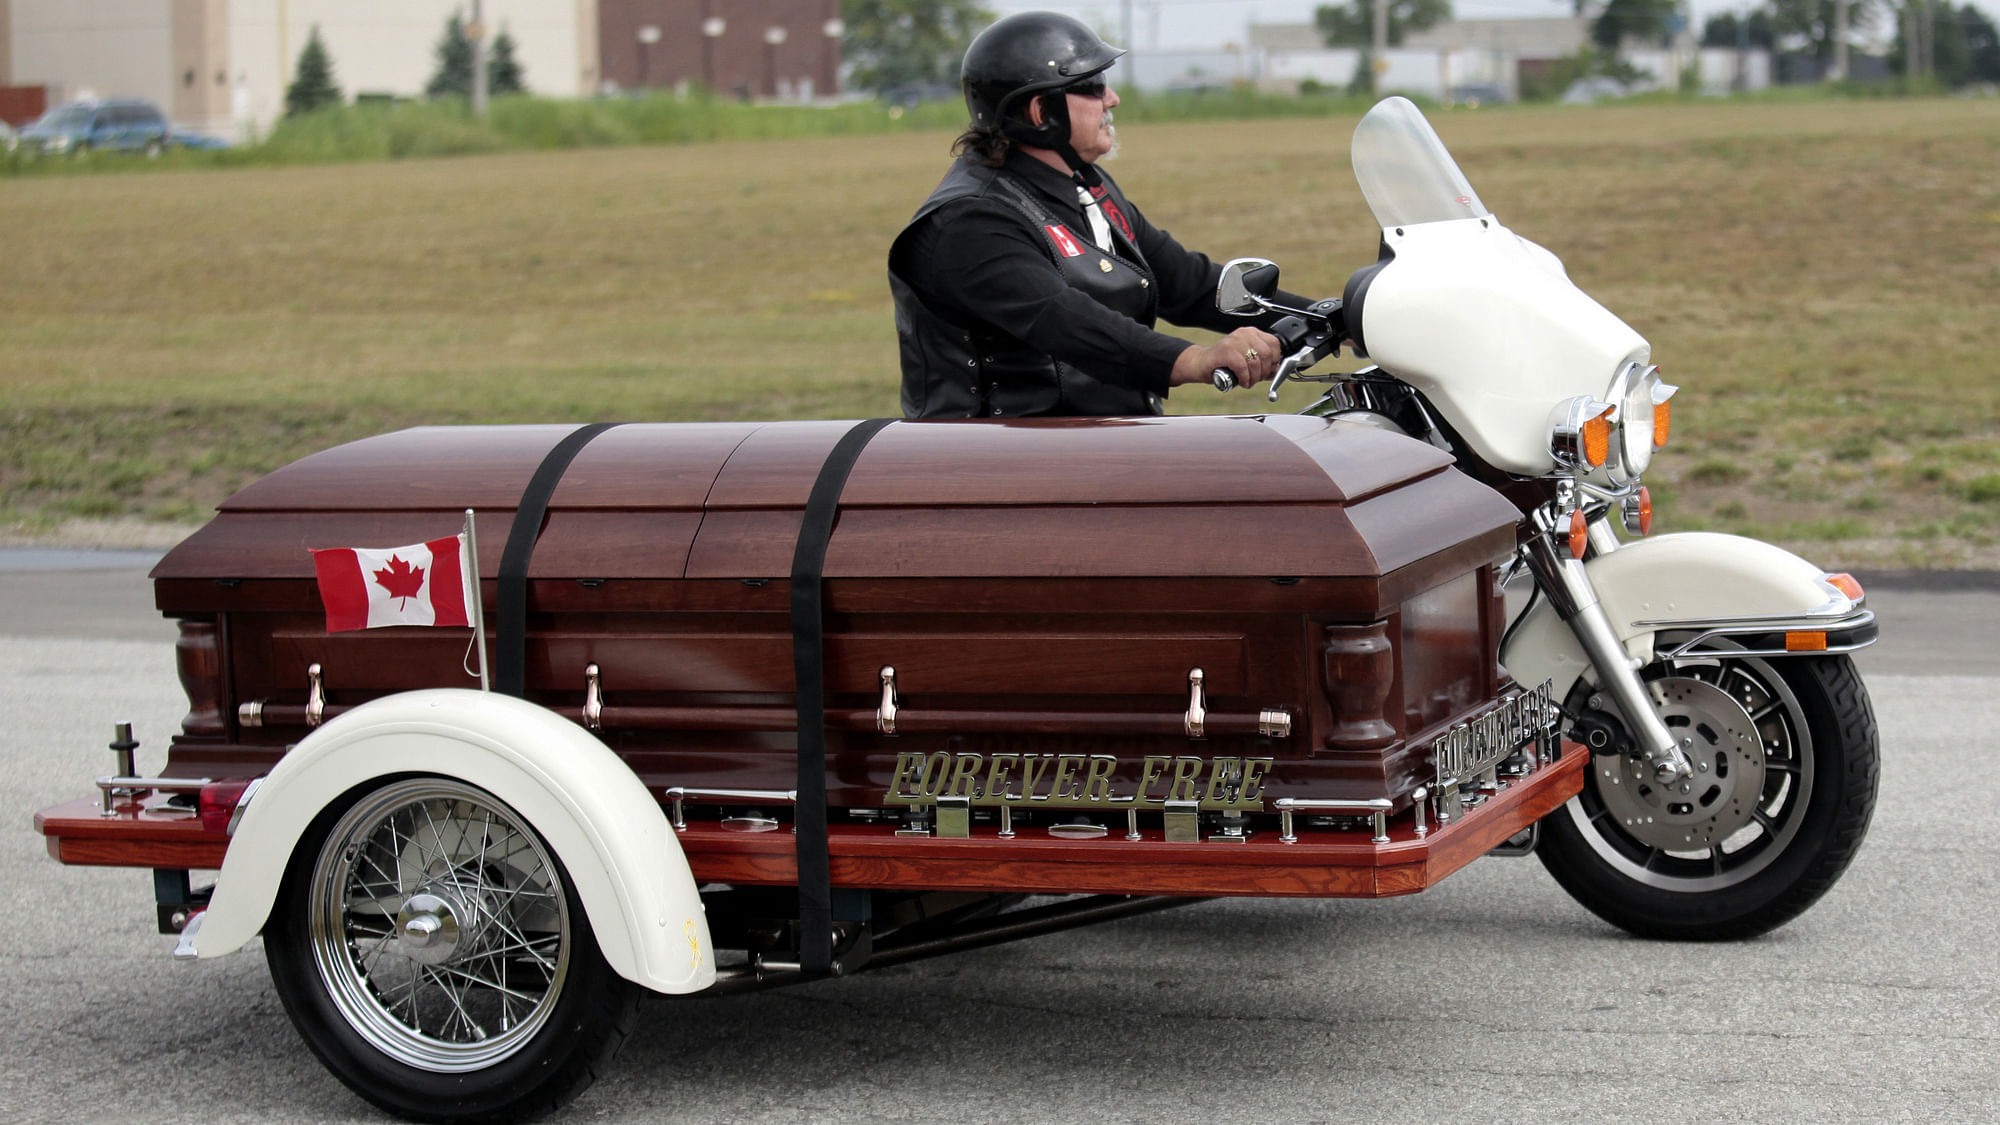 The casket with the remains of Bob Probert, former NHL hockey player for the Detroit Red Wings and Chicago Blackhawks, arrives on a motorcycle side car driven by George Winney for Proberts funeral service at the Christian Fellowship Church in Windsor. (Photo: Reuters)